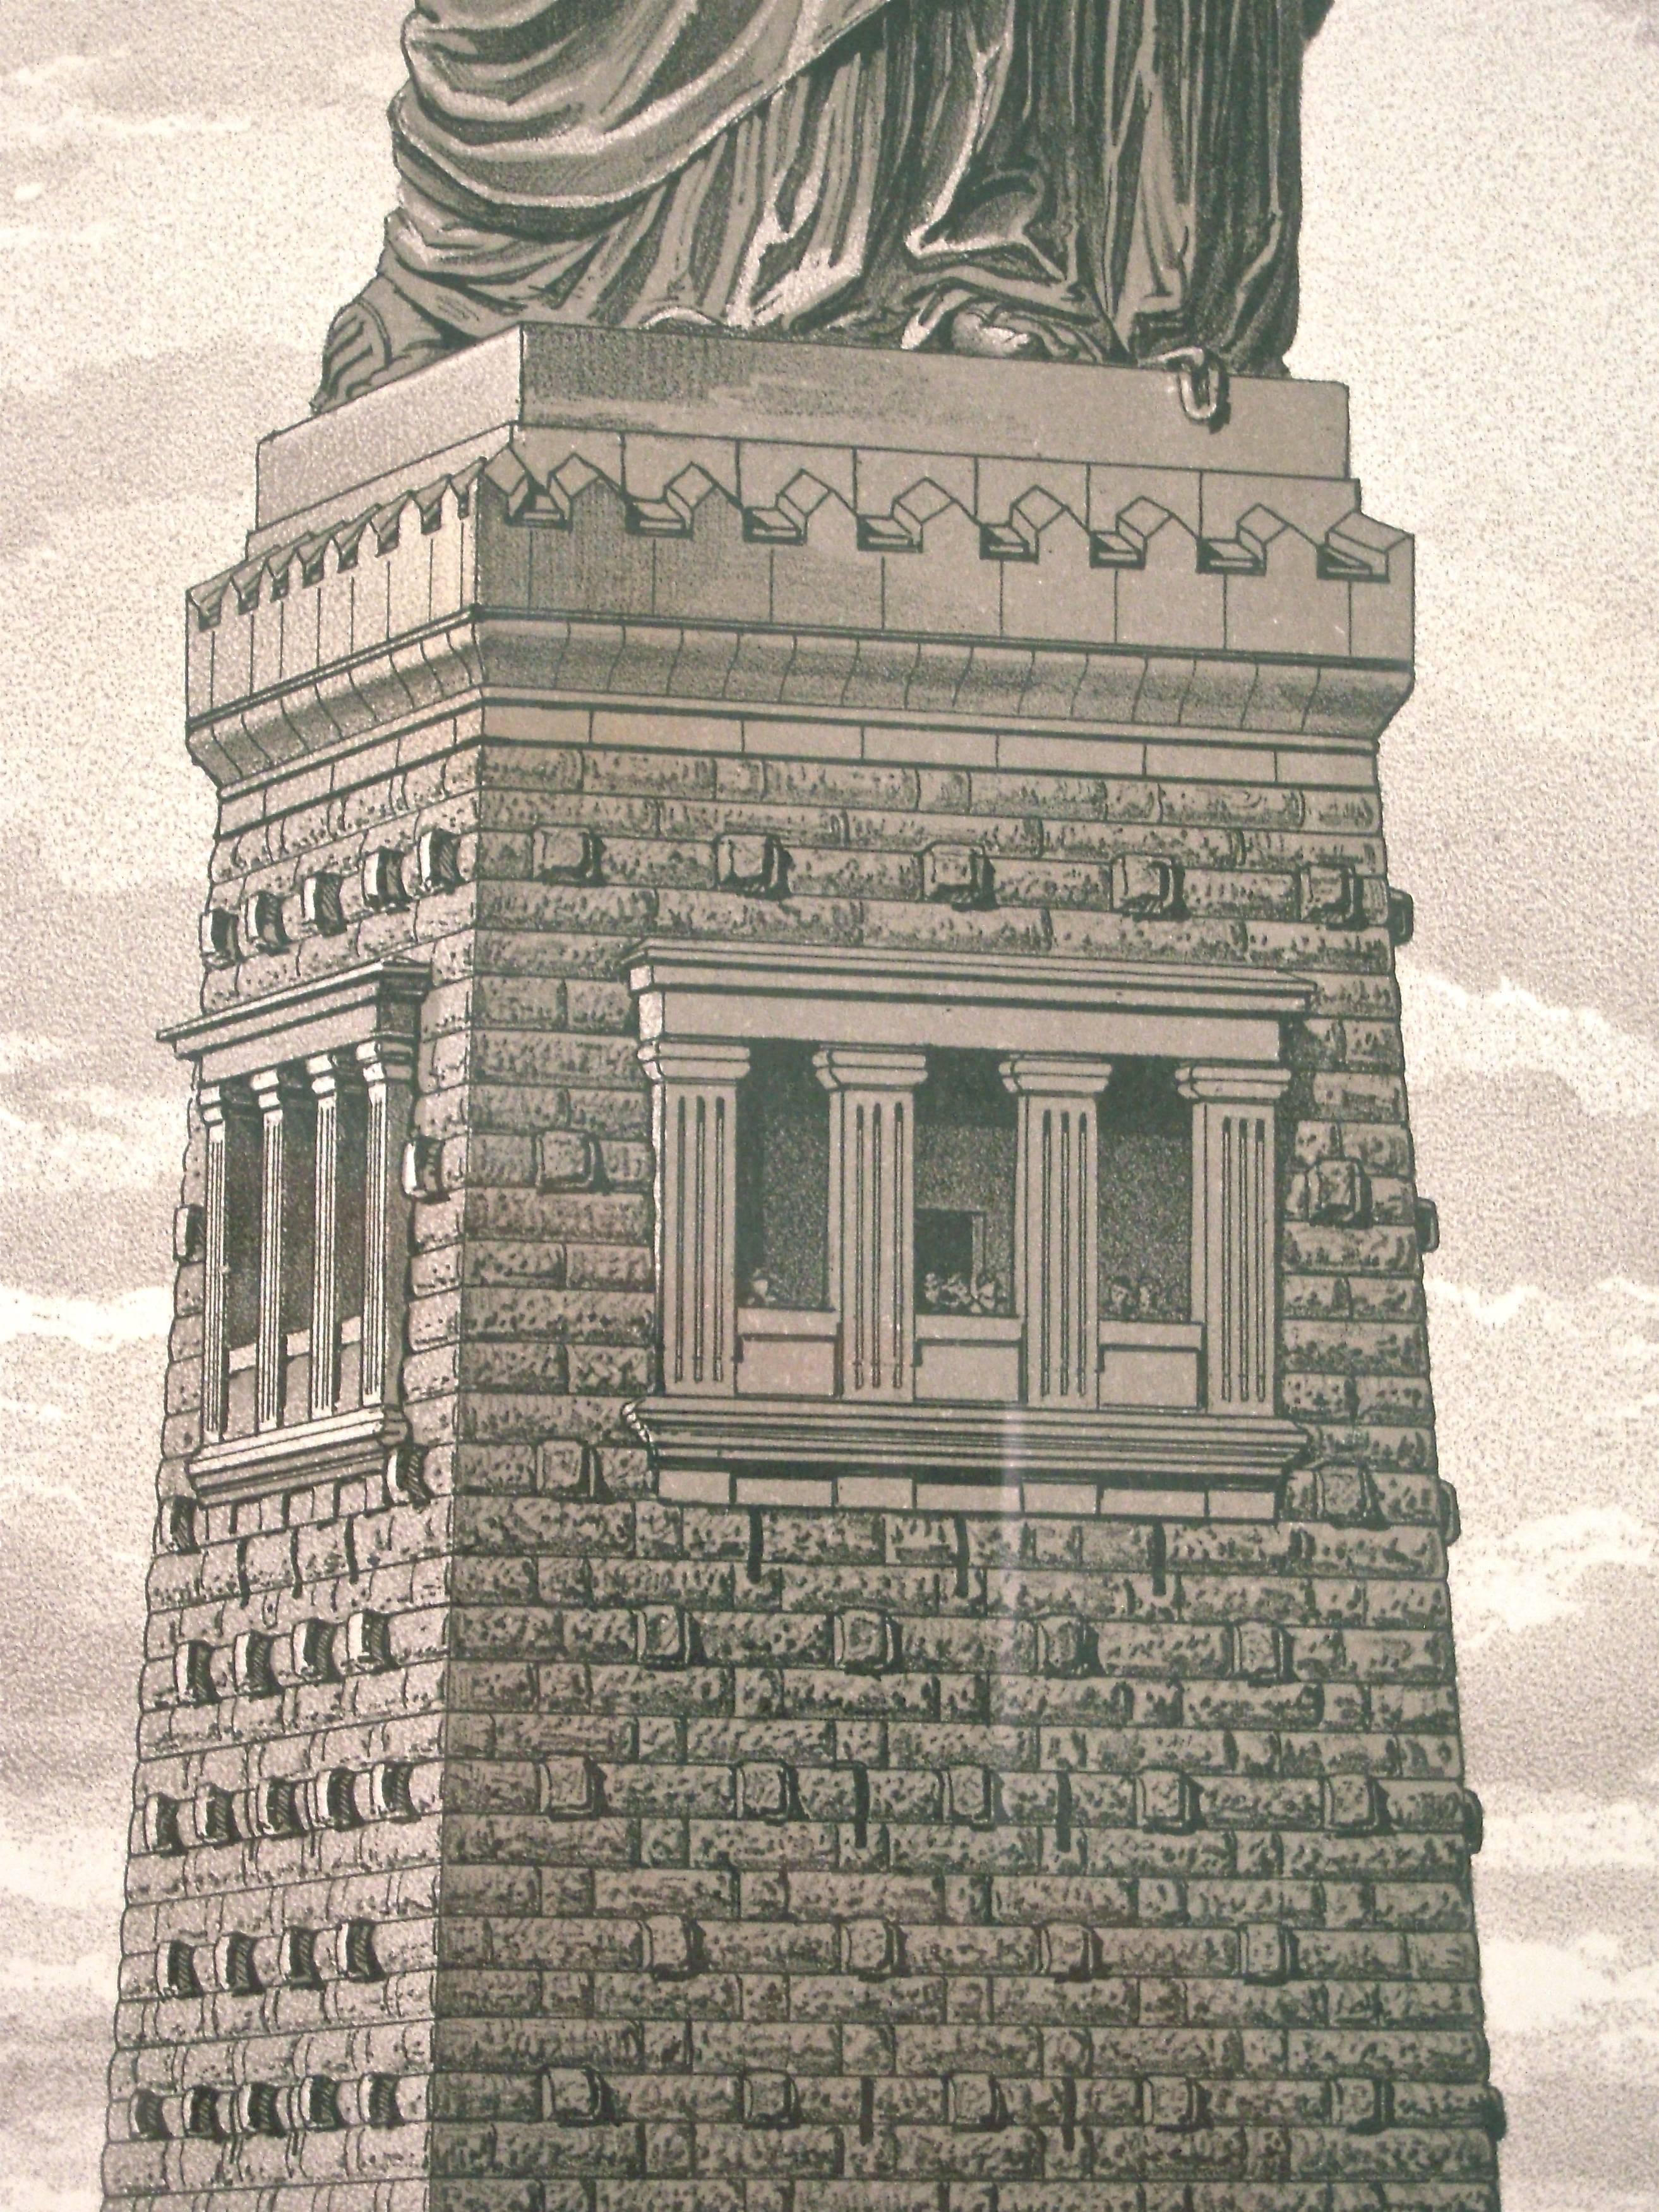 American Statue of Liberty Print by Root and Tinker, circa 1883, 36